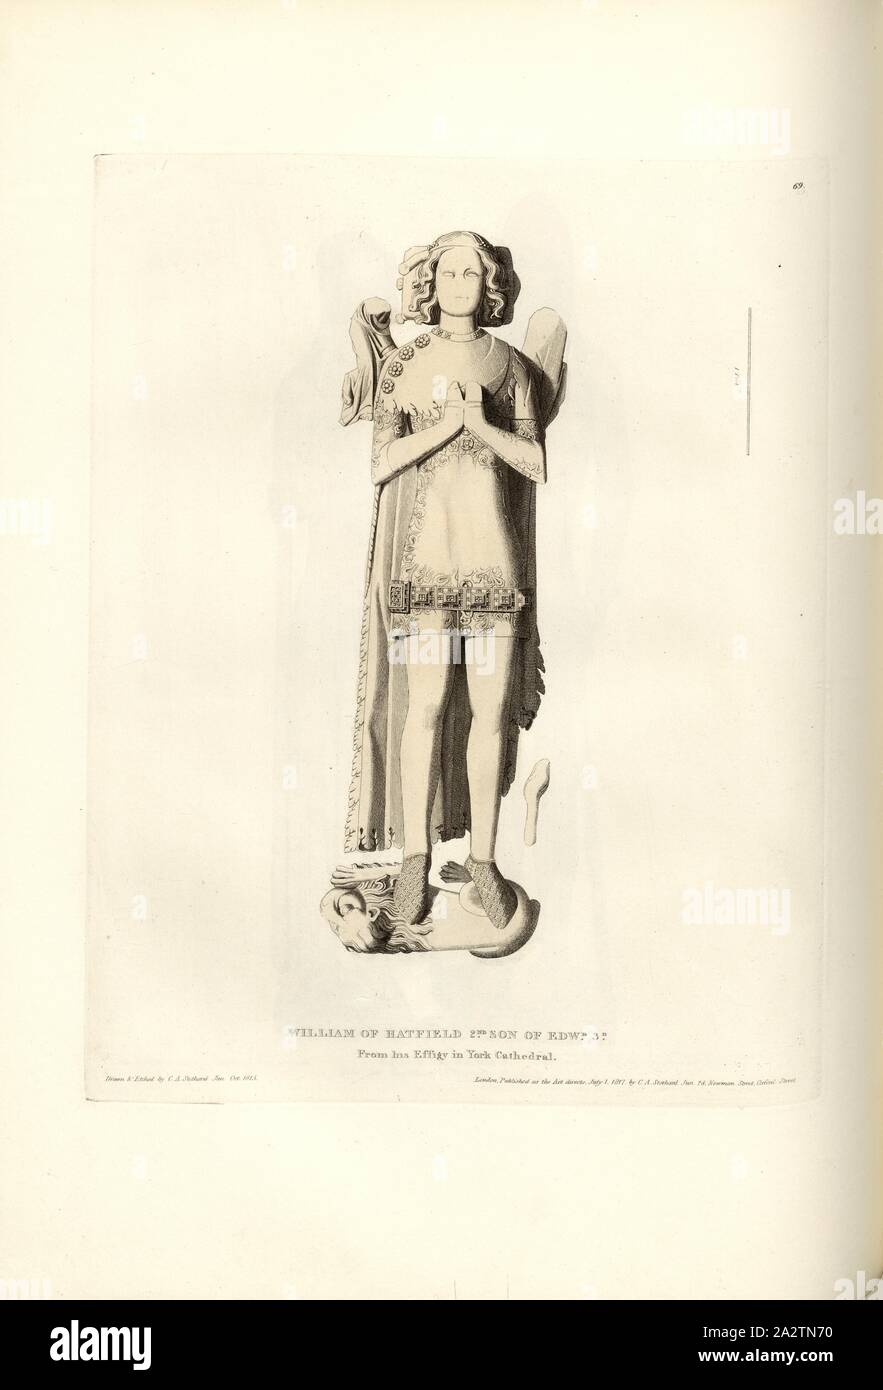 William of Hatfield 2. Son of Edw. 3. From Ins Effigy in York Cathedral, Tomb of William of Hatfield in the York Minster of York in Yorkshire, signed: Drawn & Etched by C.A. Stothard Jun, Published by C.A. Stothard Jun, Fig. 78, 69, after p. 56, Stothard, Charles Alfred Jun. (drawn, etched and publ.), Charles Alfred Stothard, Alfred John Kempe: The monumental effigies of Great Britain: selected from our cathedrals and churches, for the purpose of bringing together, and preserving correct representations of the best historical illustrations extant, from the Norman conquest to the reign of Henry Stock Photo